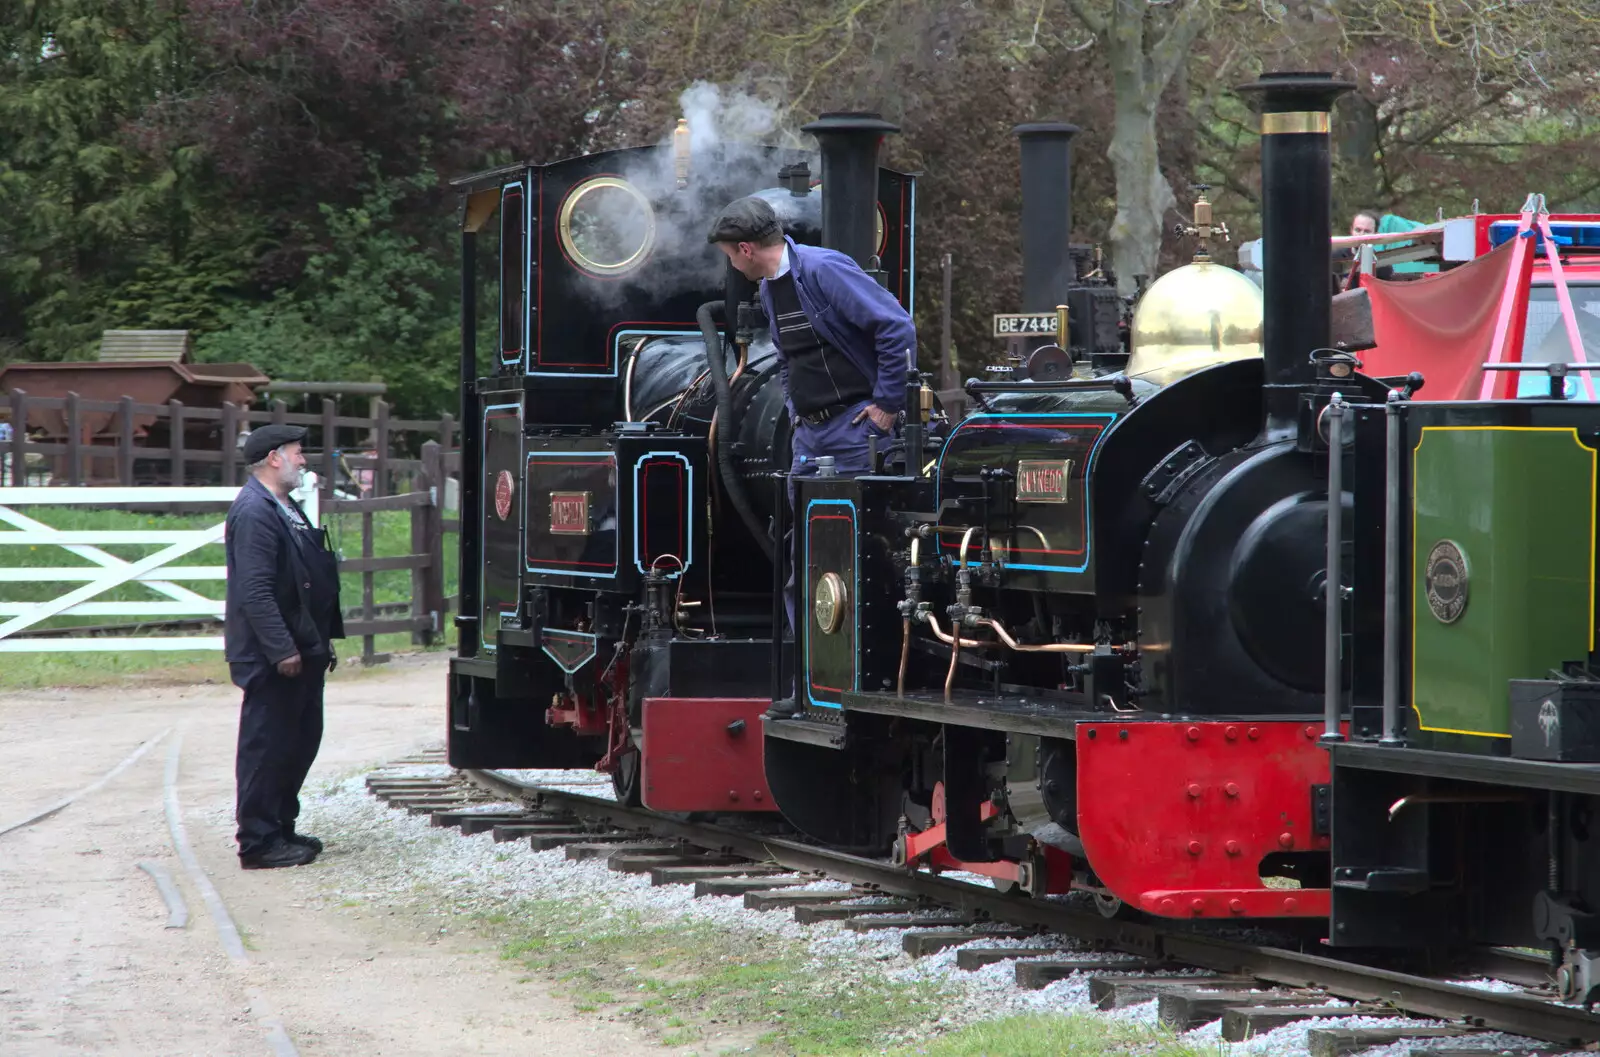 Gwynedd gets ready to return to the sheds, from The Heritage Steam Gala, Bressingham Steam Museum, Norfolk - 1st May 2023